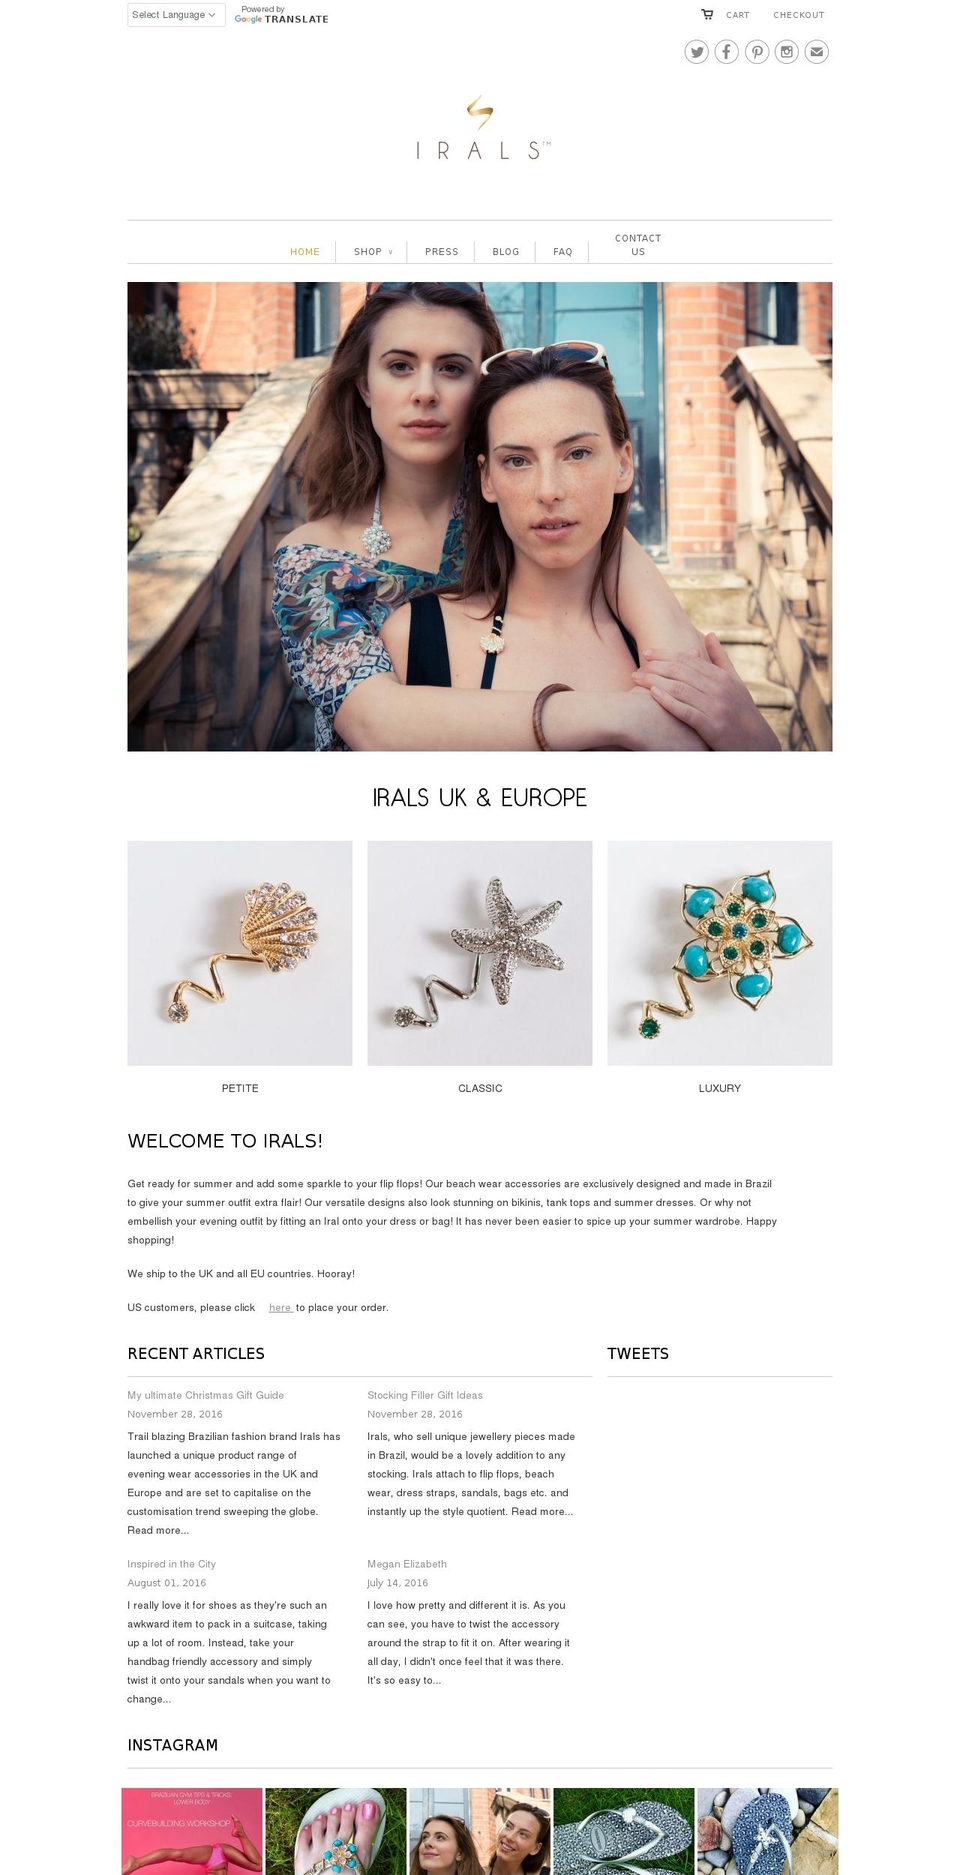 Ira Shopify theme site example crystalswithatwist.com